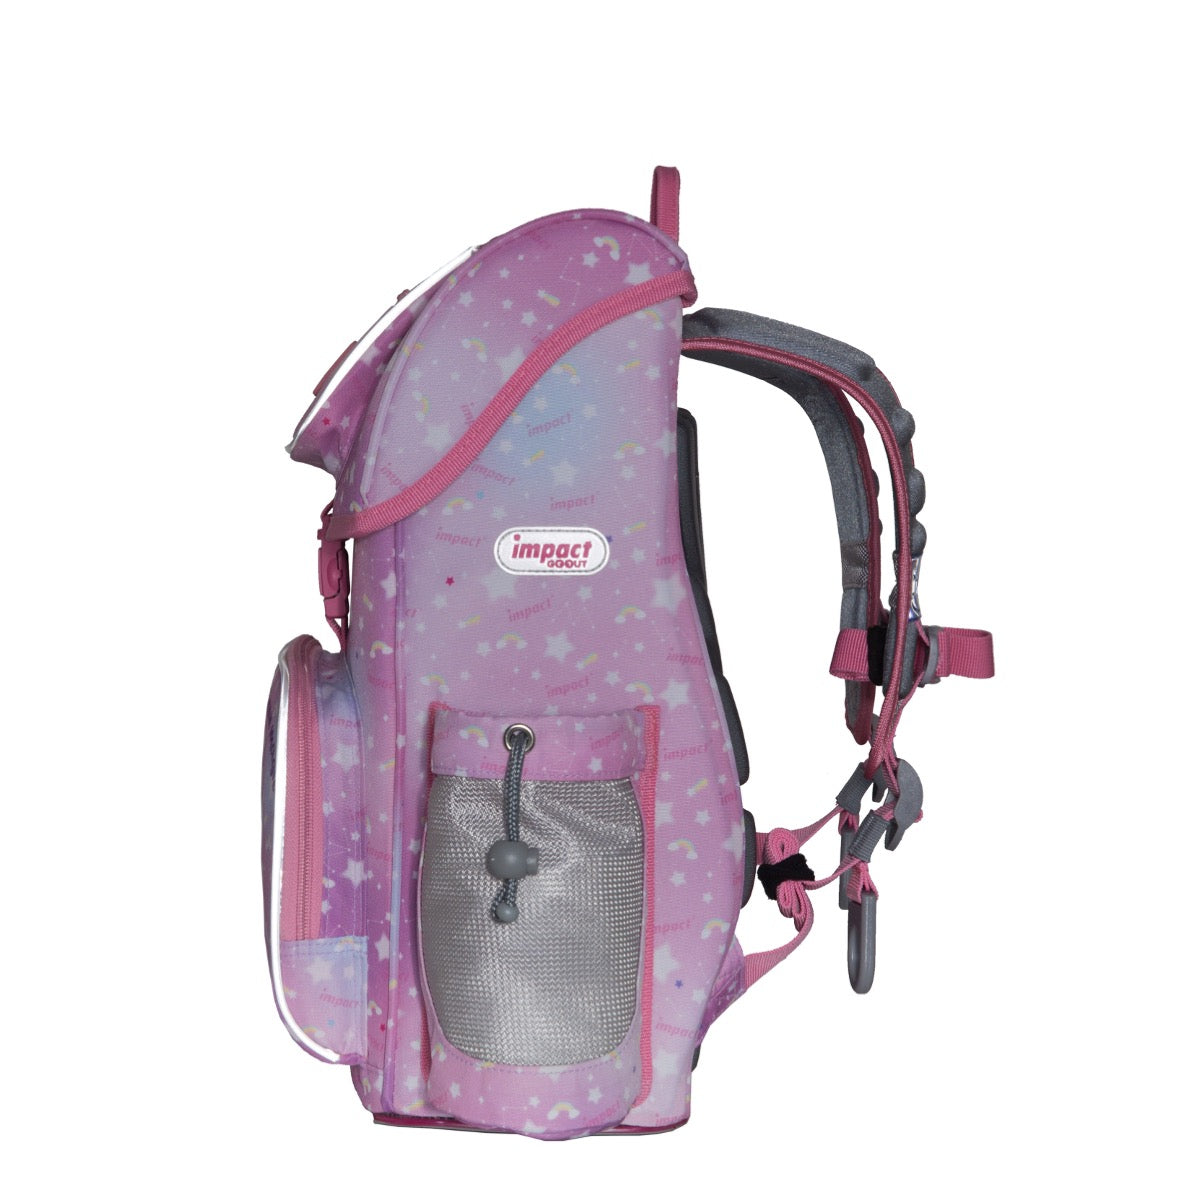 Impact School Bag IM-00707-PK - Ergo-Comfort Spinal Support with Magnetic Buckle Backpack